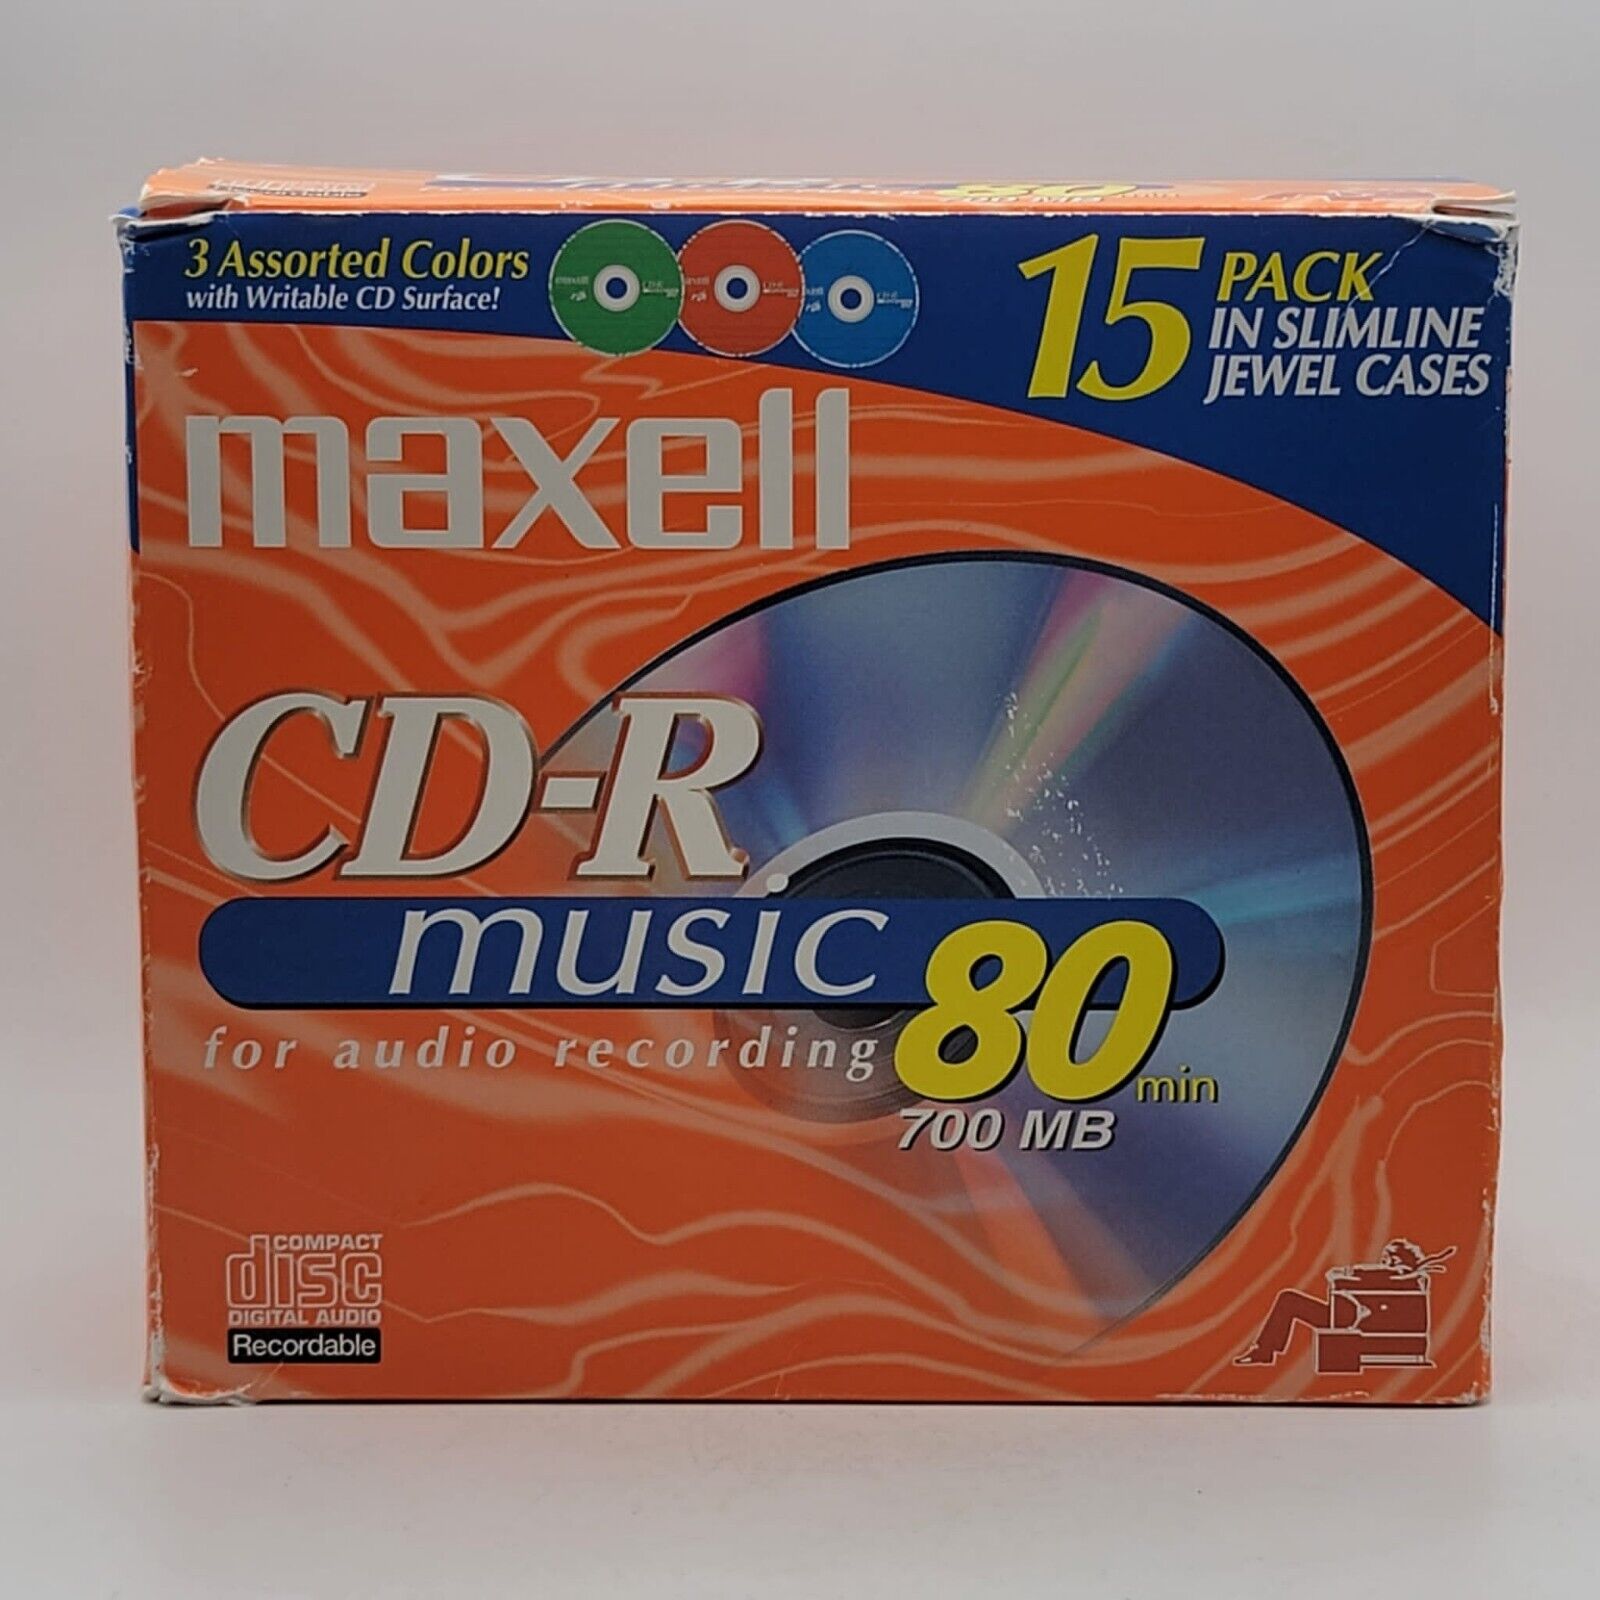 Maxell CD-R (14 TOTAL)  Music Disc 3 Colors Slim Jewel Cases 80 Min Writable